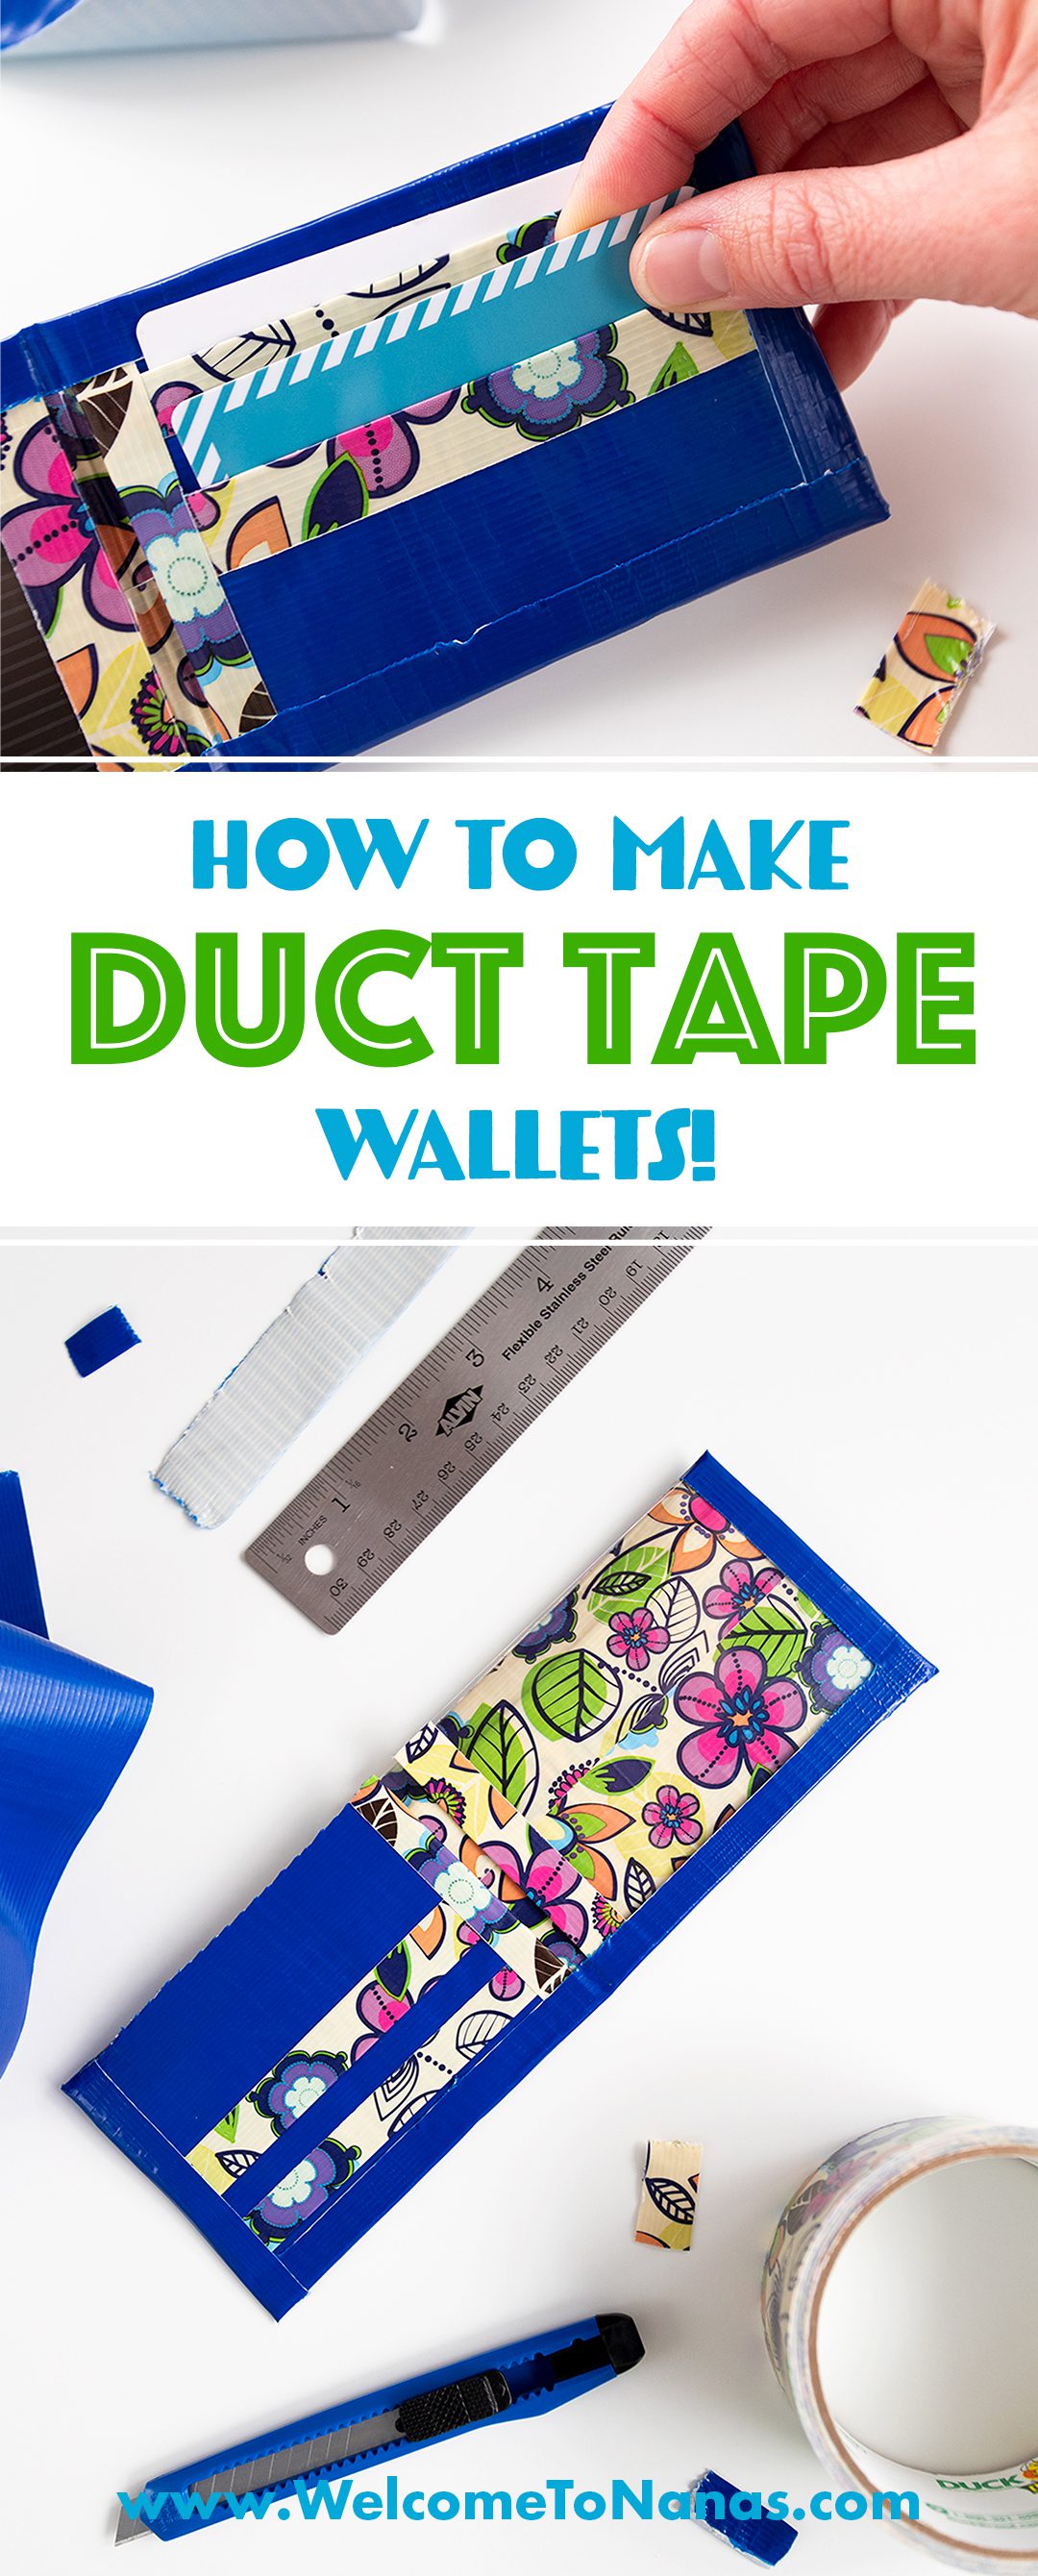 A flower patterned duct tape wallet, utility knife and blue roll of duct tape.